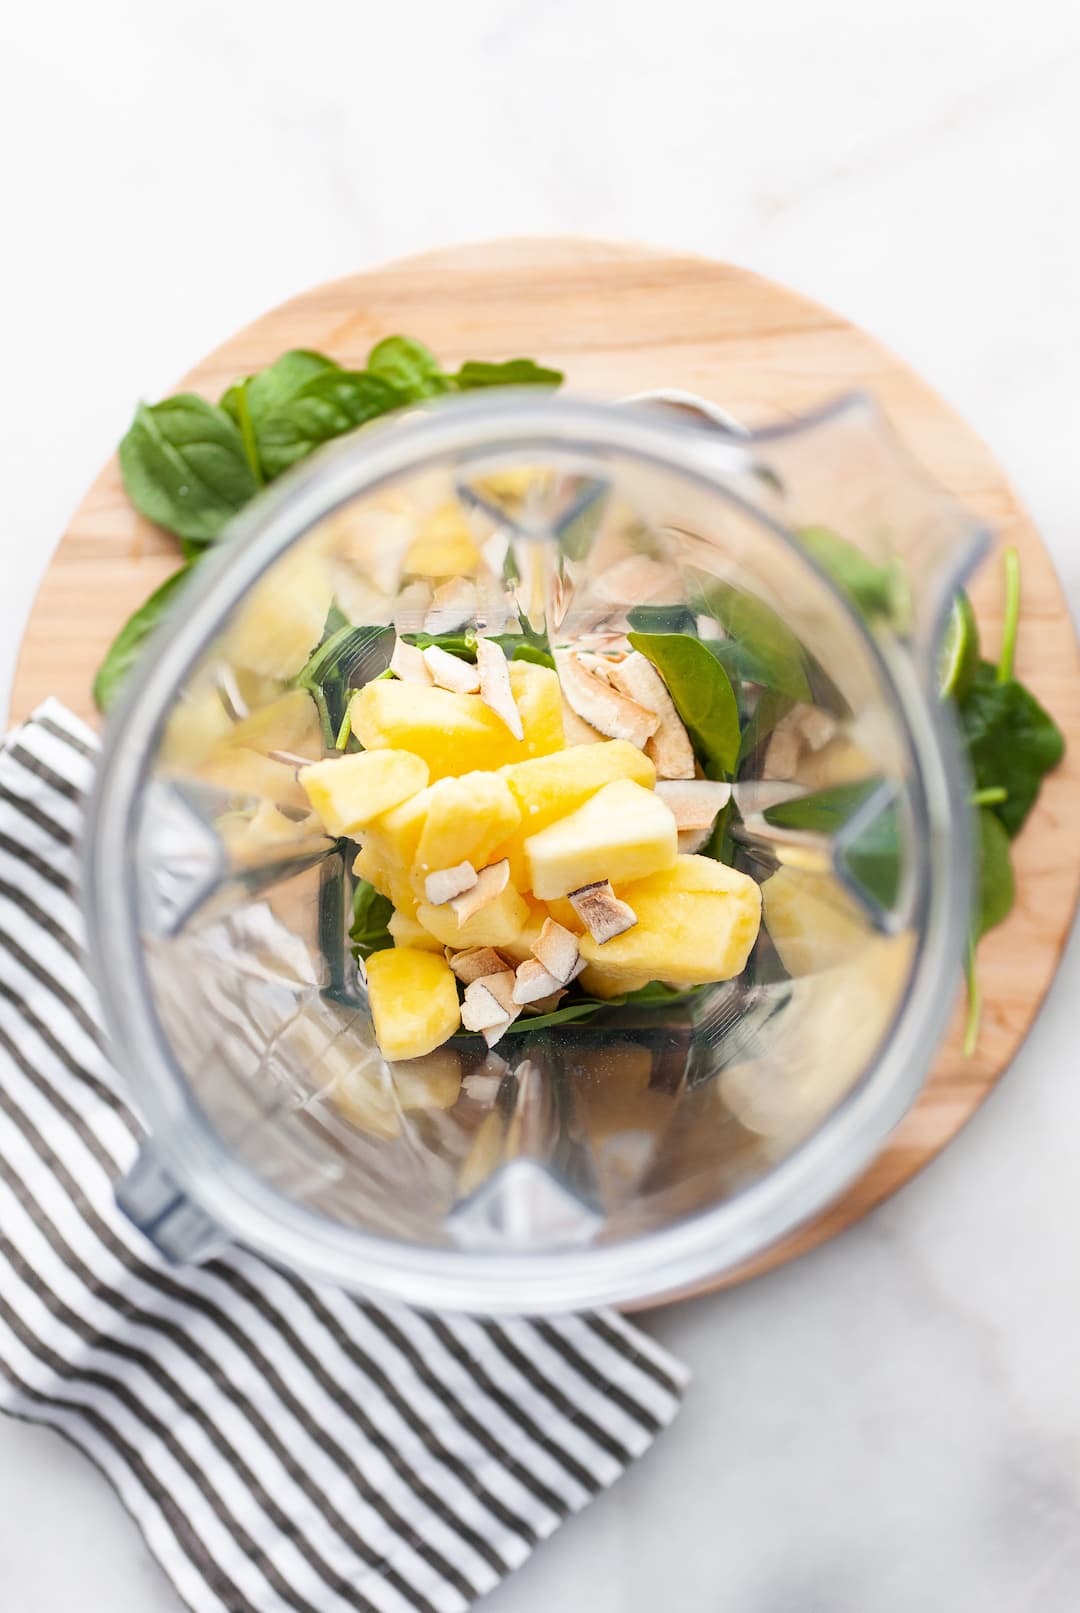 image of the overhead view of a blender canister filled with frozen pineapple, spinach, banana, and coconut